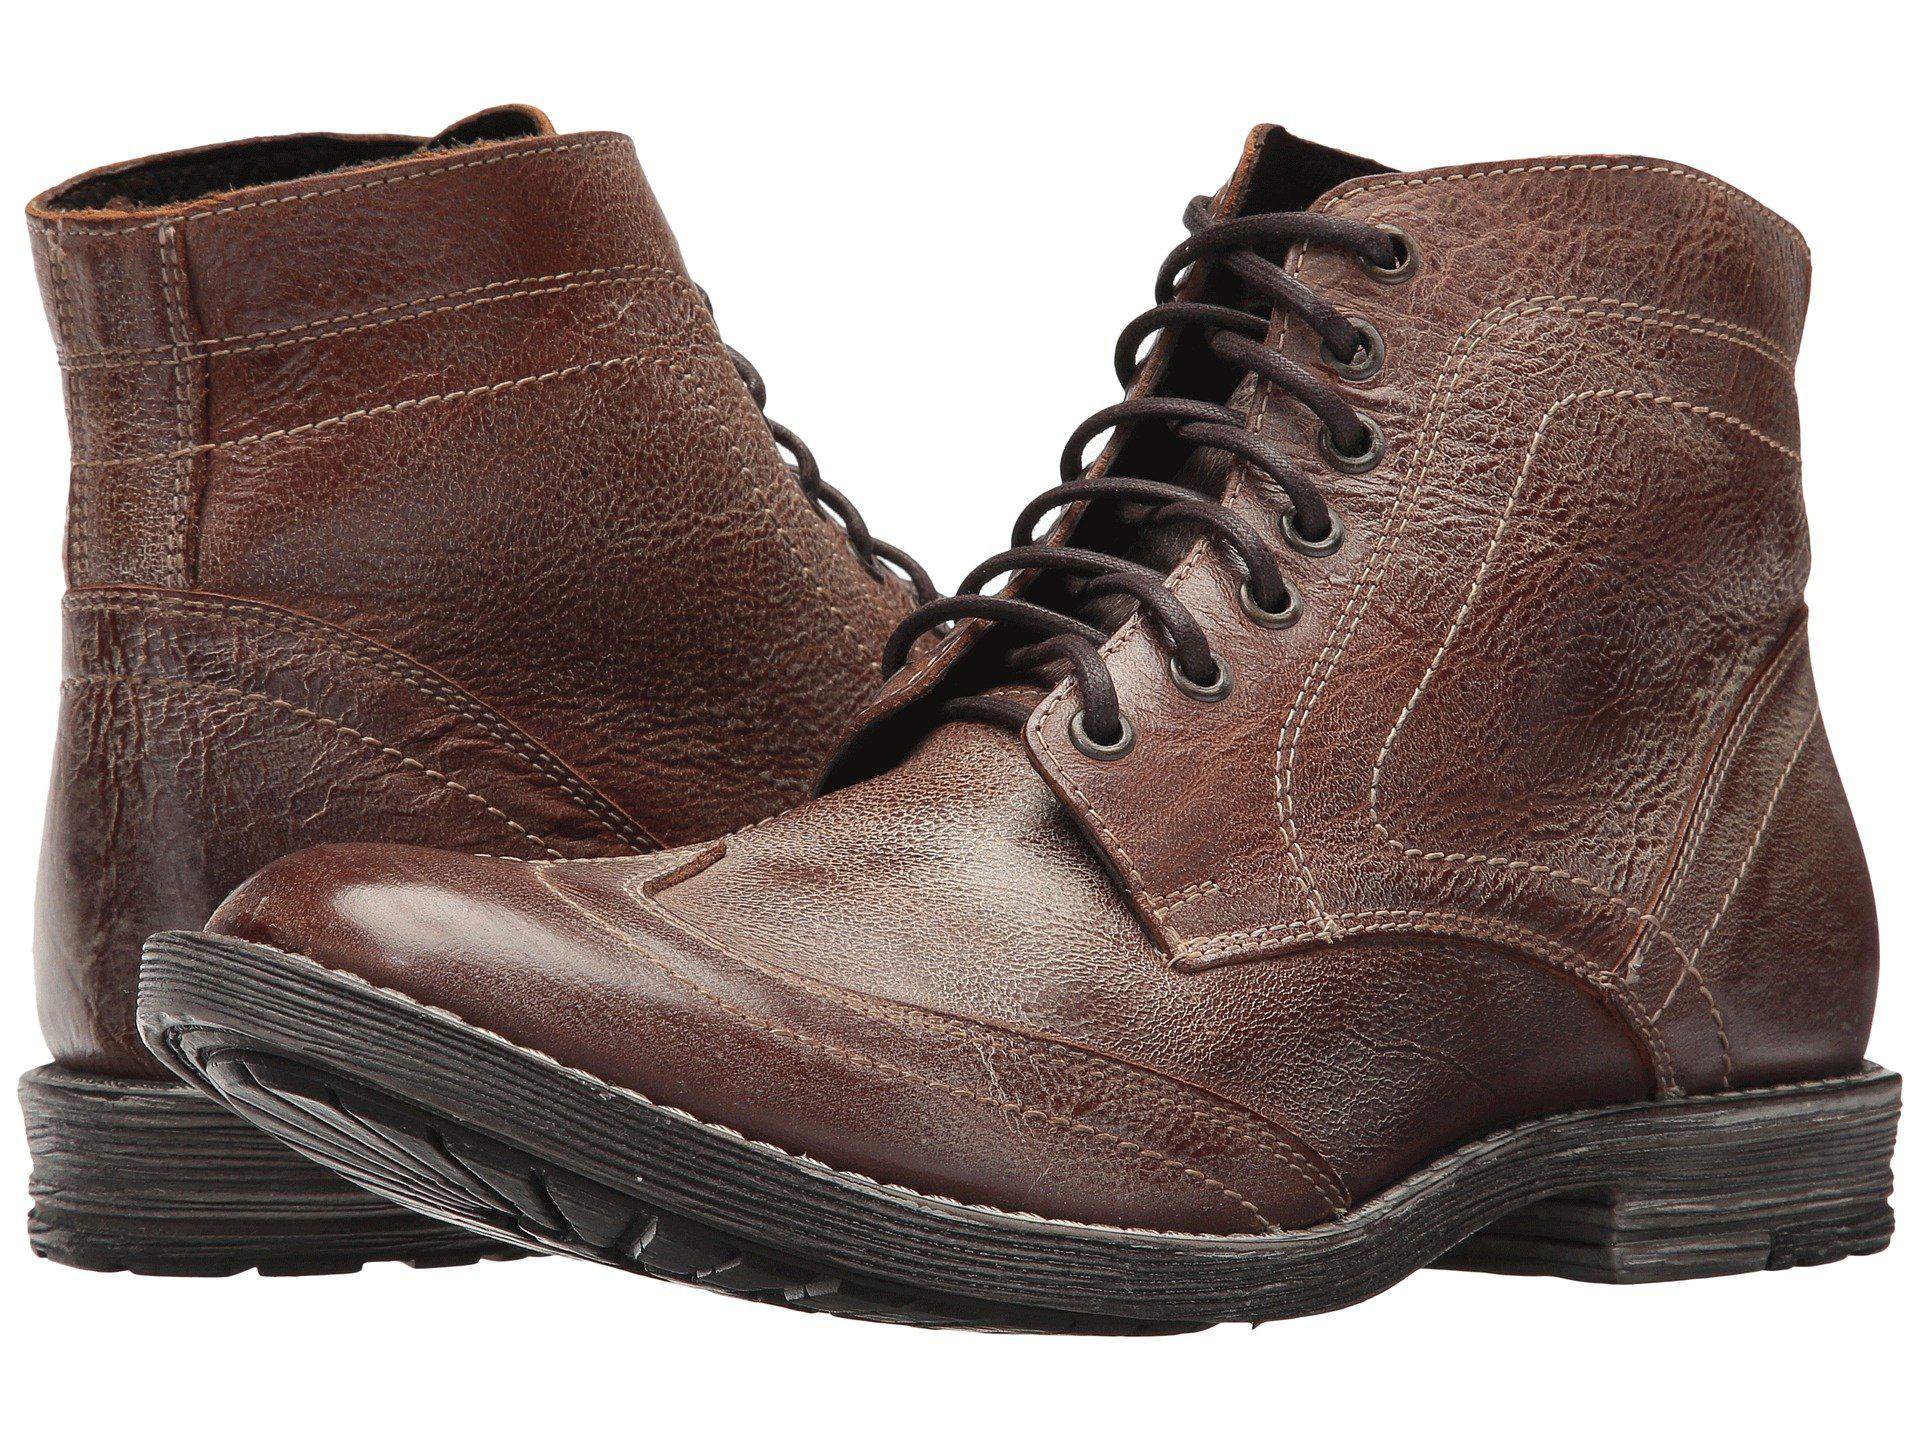 roan outlaw boot